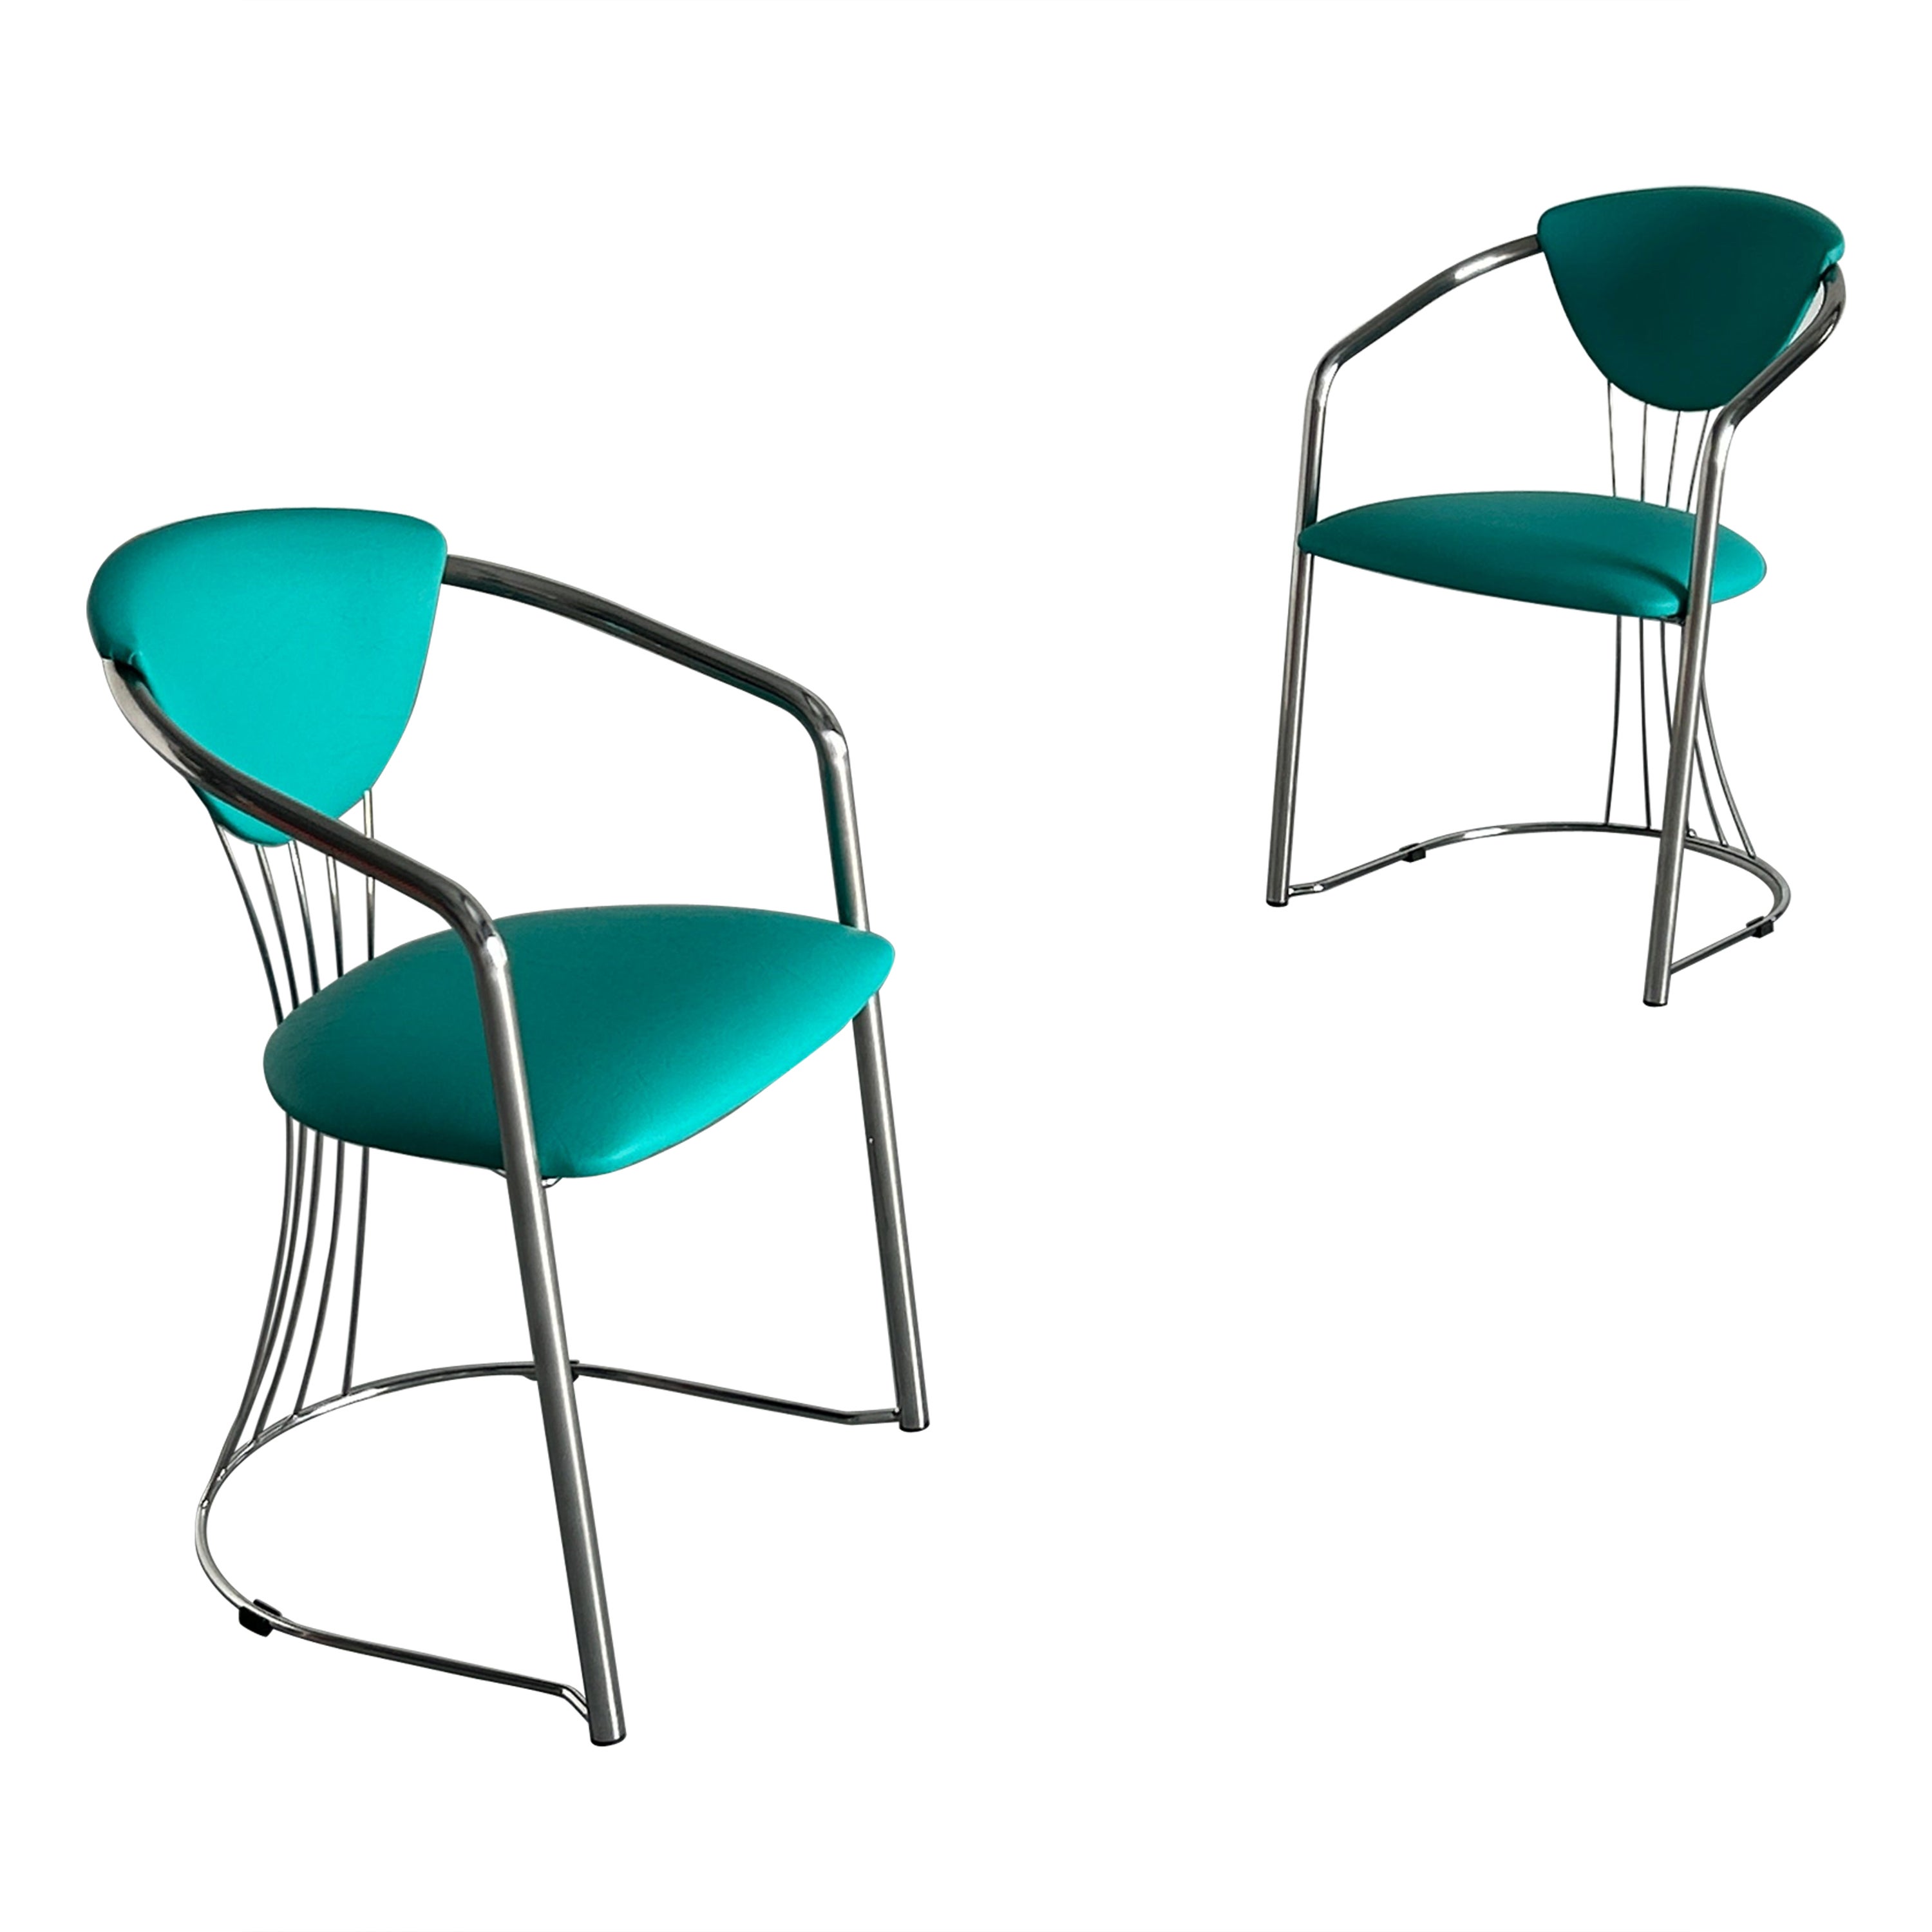 1 of 2 Vintage Steel and Mint Green Faux Leather Dining Chairs by Effezeta, 90s For Sale